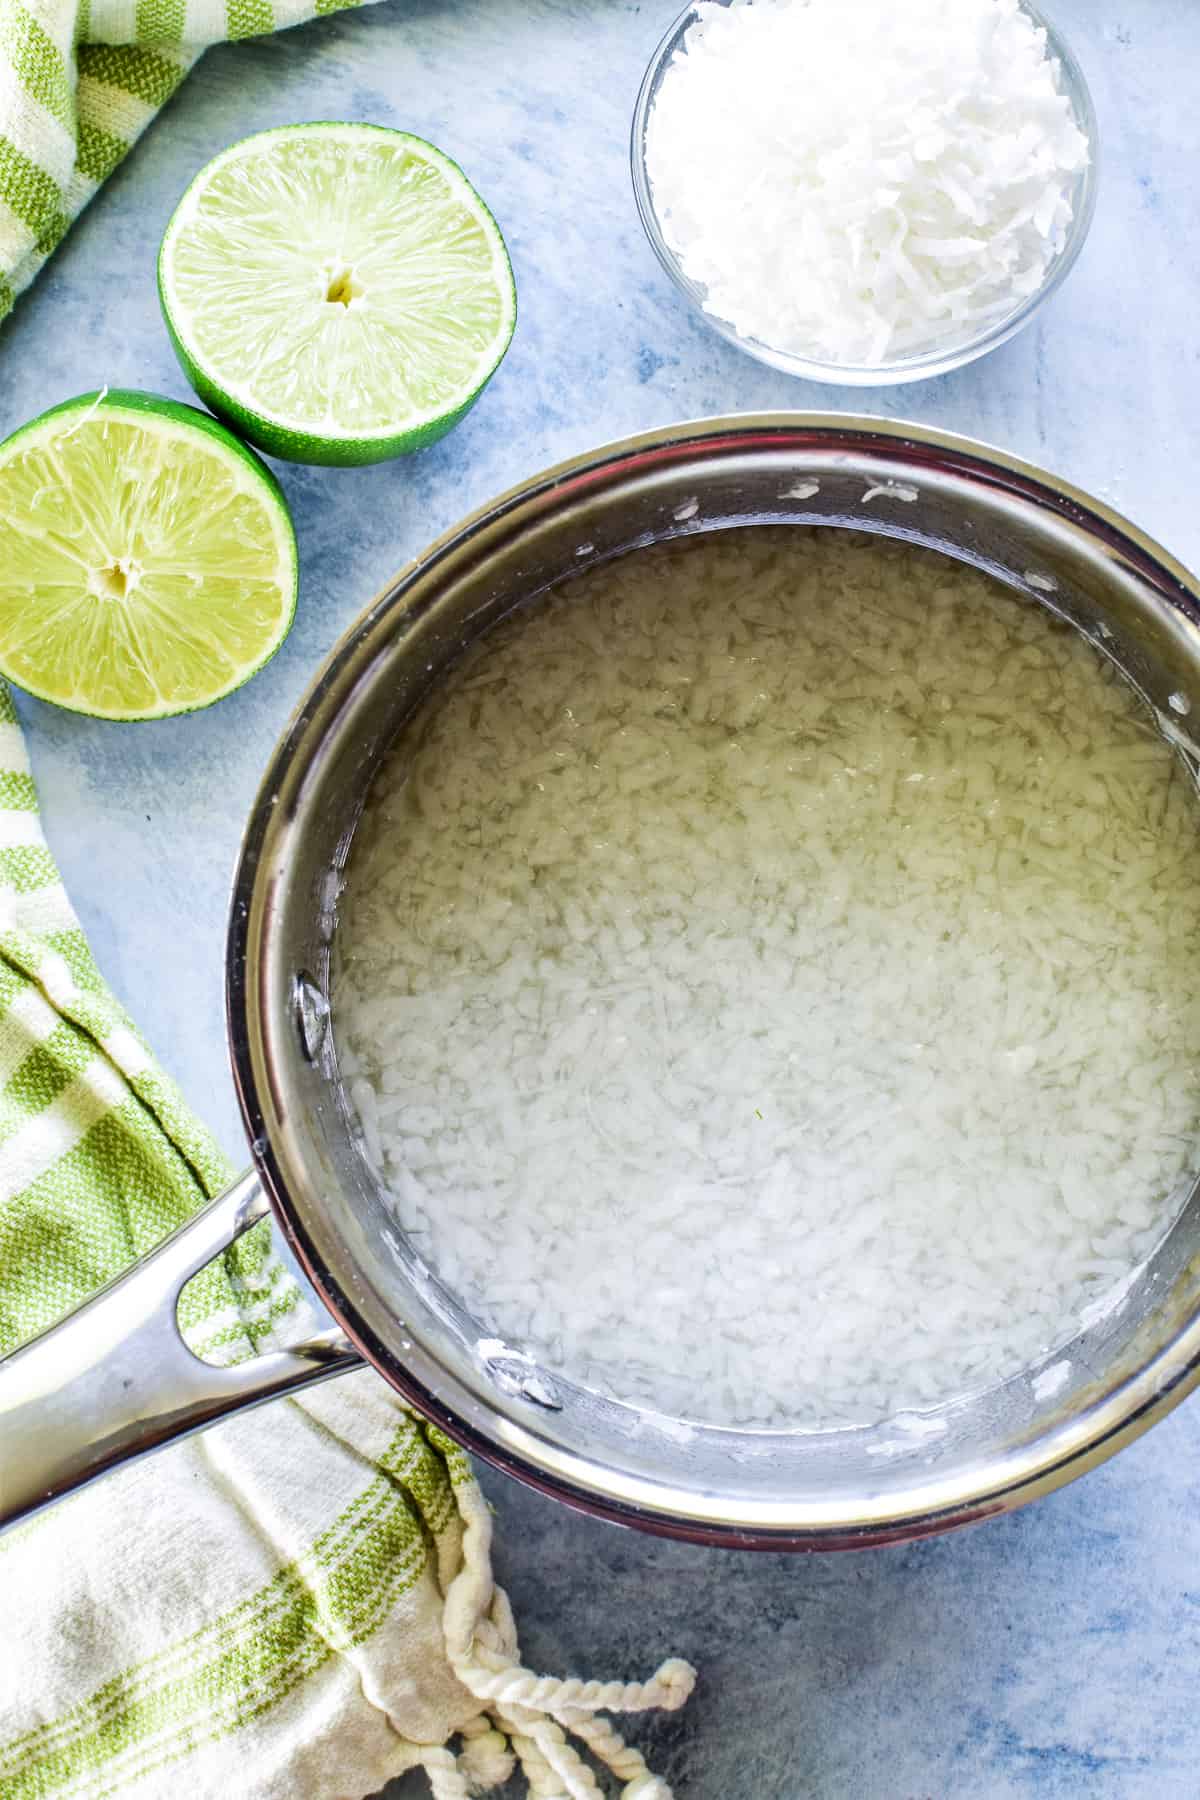 Coconut Lime Simple Syrup in a saucepan with limes and shredded coconut